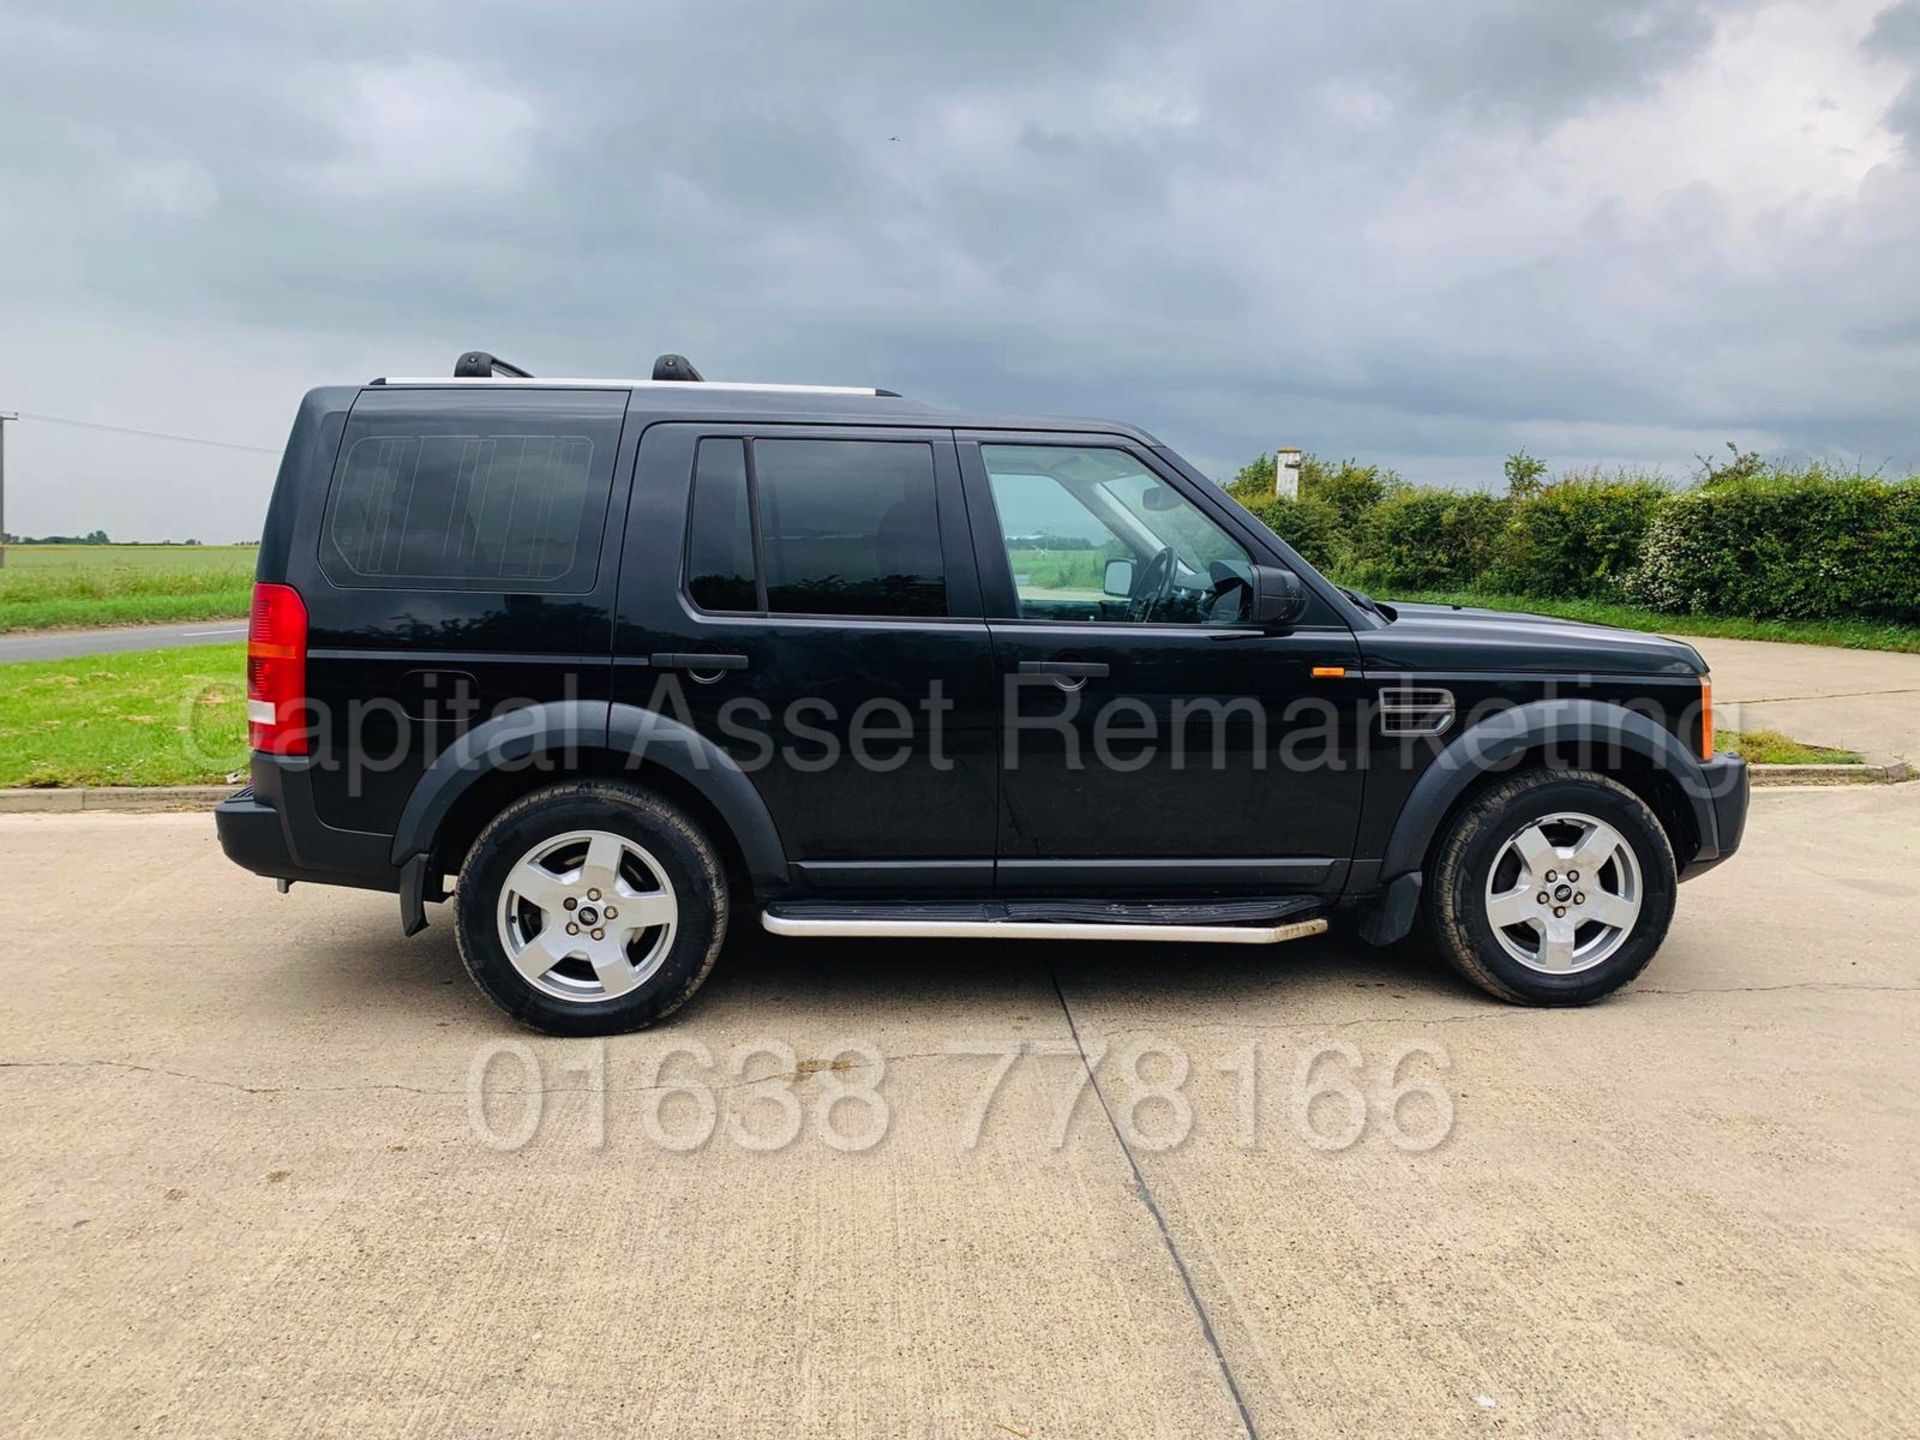 LAND ROVER DISCOVERY 3 *S EDITION* 7 SEATER SUV (2006 - NEW MODEL) '2.7 TDV6 - 190 BHP' *HUGE SPEC* - Image 10 of 36